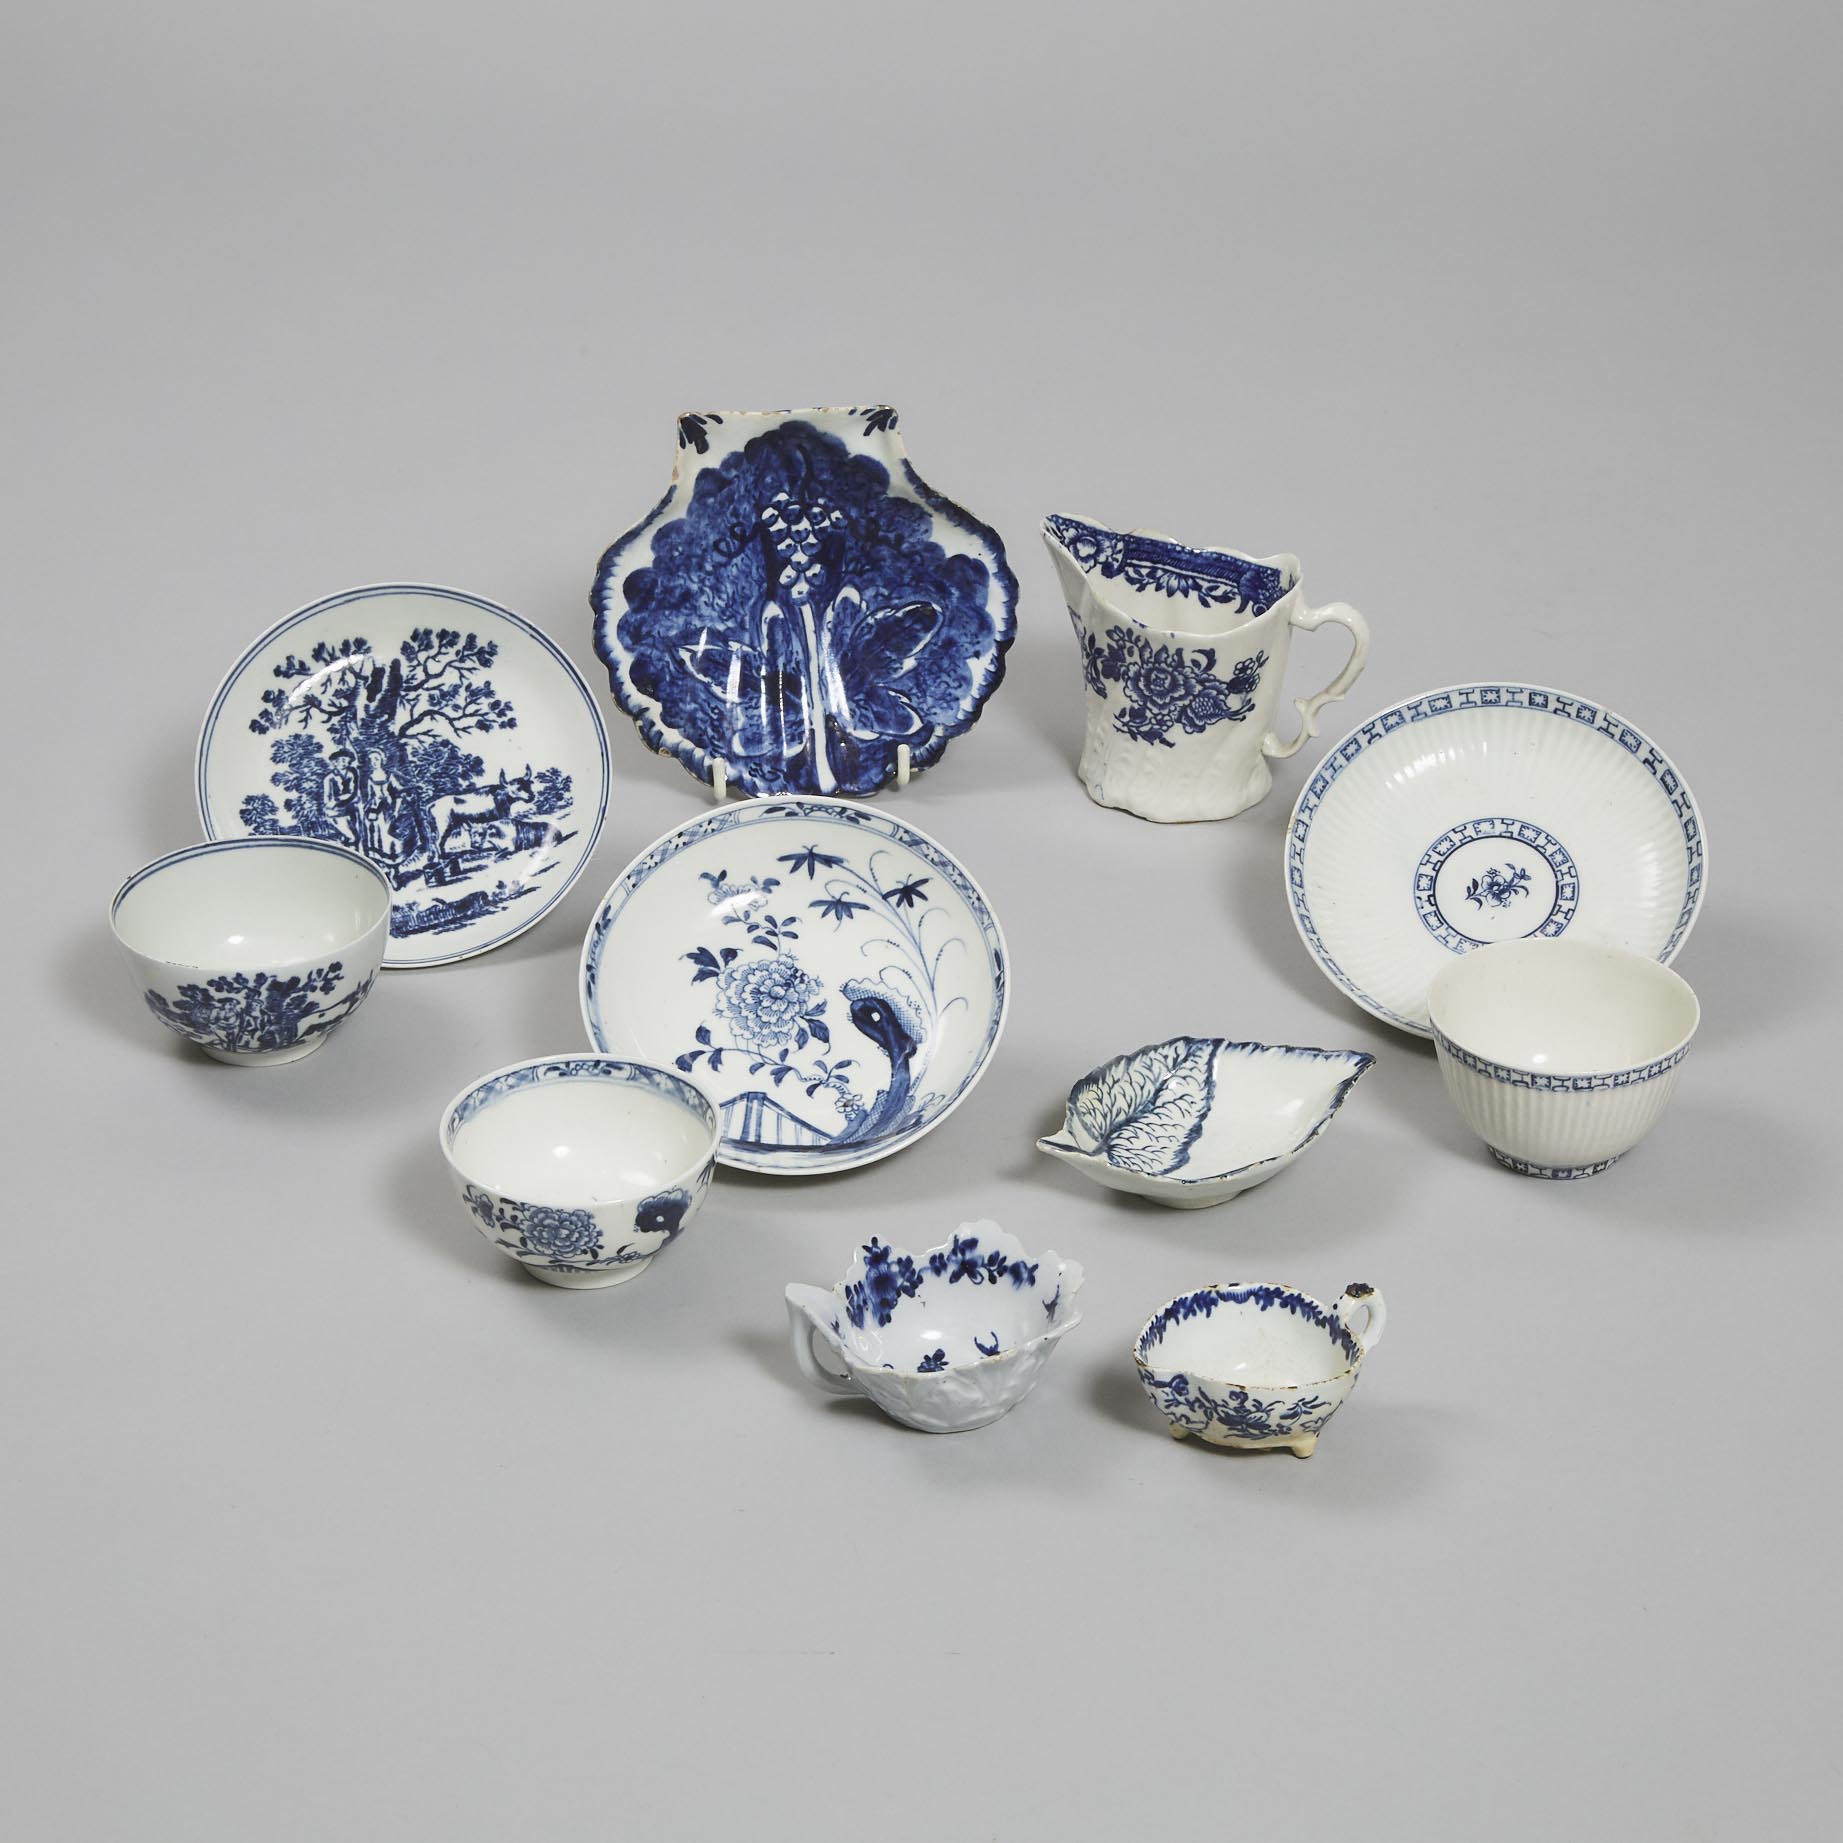 Group of English Blue and White Porcelain, 18th century